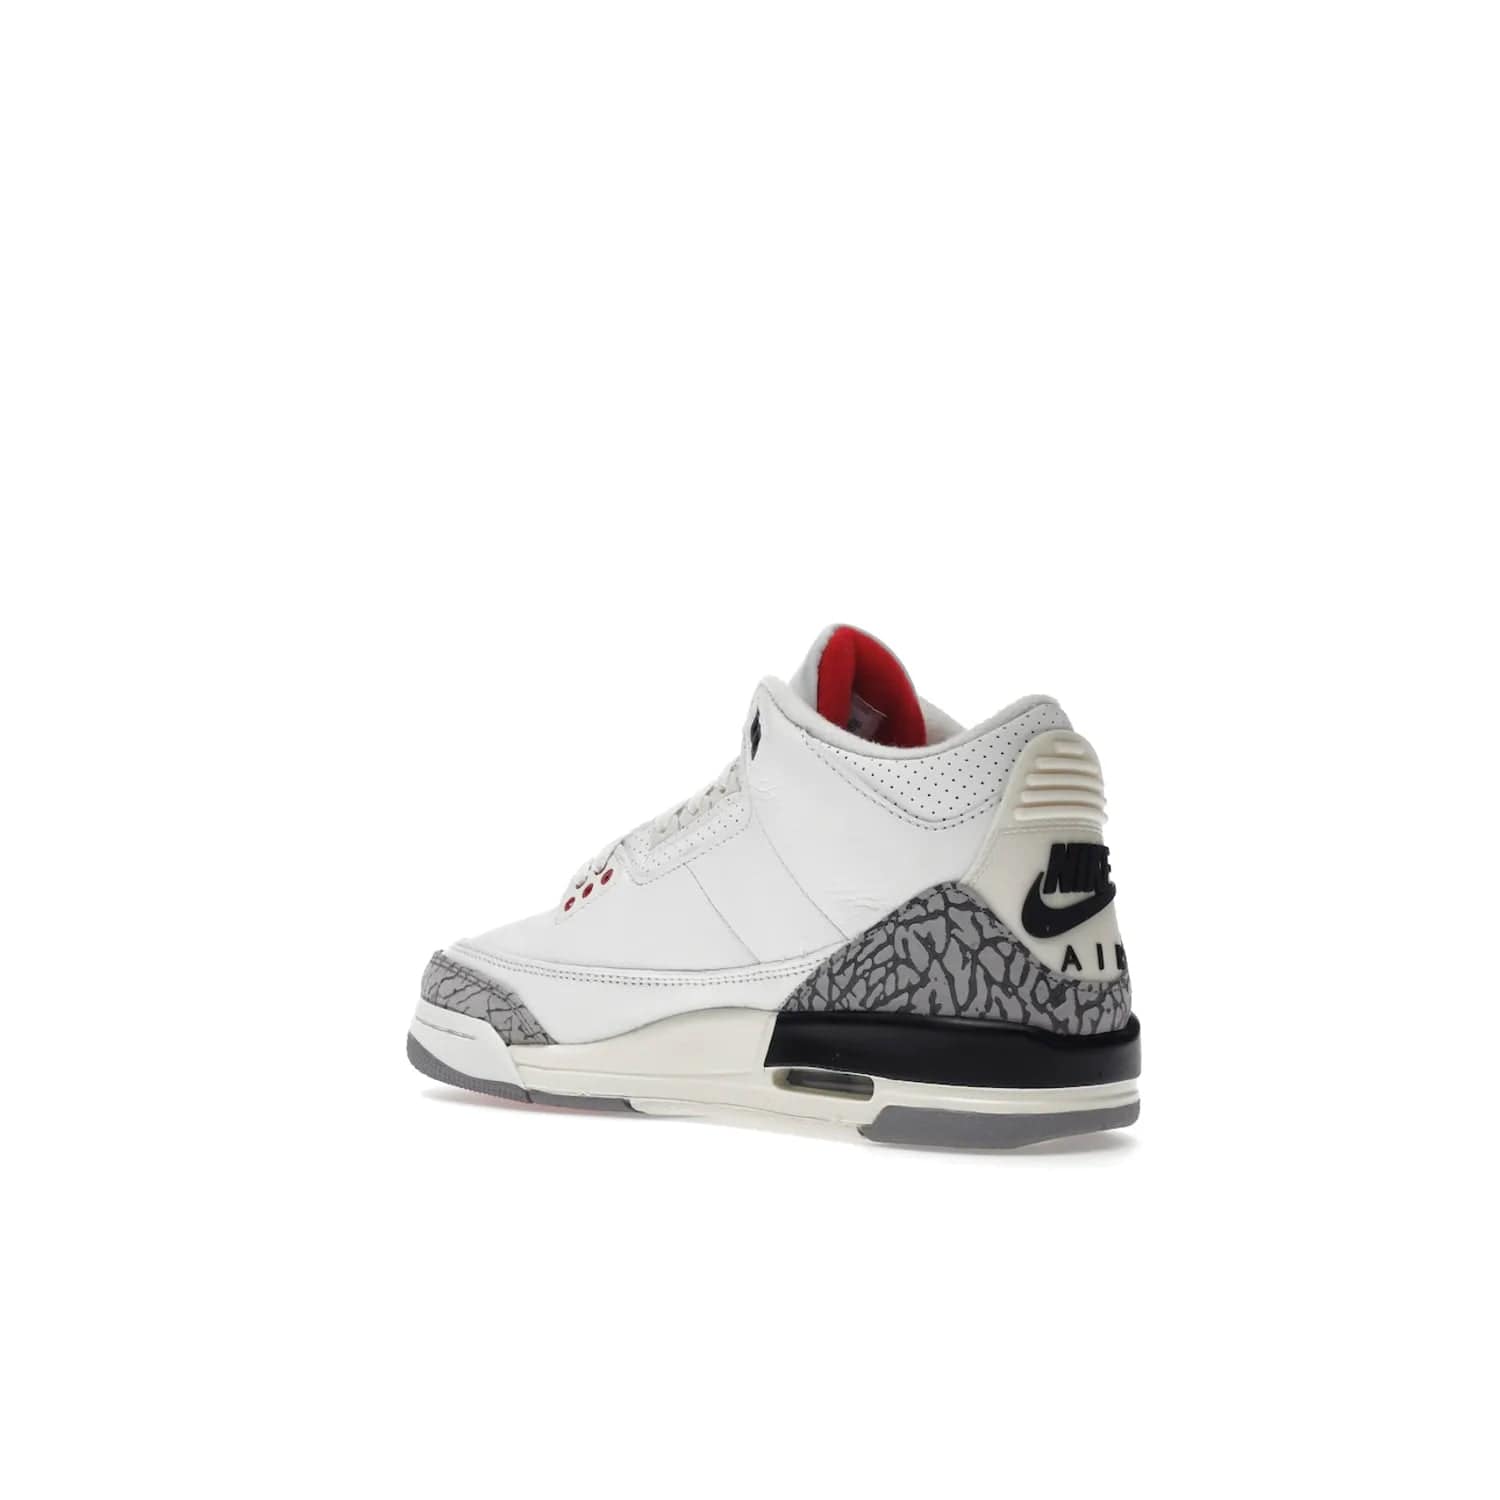 Jordan 3 Retro White Cement Reimagined (GS) - Image 23 - Only at www.BallersClubKickz.com - Grab the perfect blend of modern design and classic style with the Jordan 3 Retro White Cement Reimagined (GS). Features Summit White, Fire Red, Black, and Cement Grey colorway, iconic Jordan logo embroidered on the tongue, and “Nike Air” branding. Limited availability, get your pair before March 11th 2023.